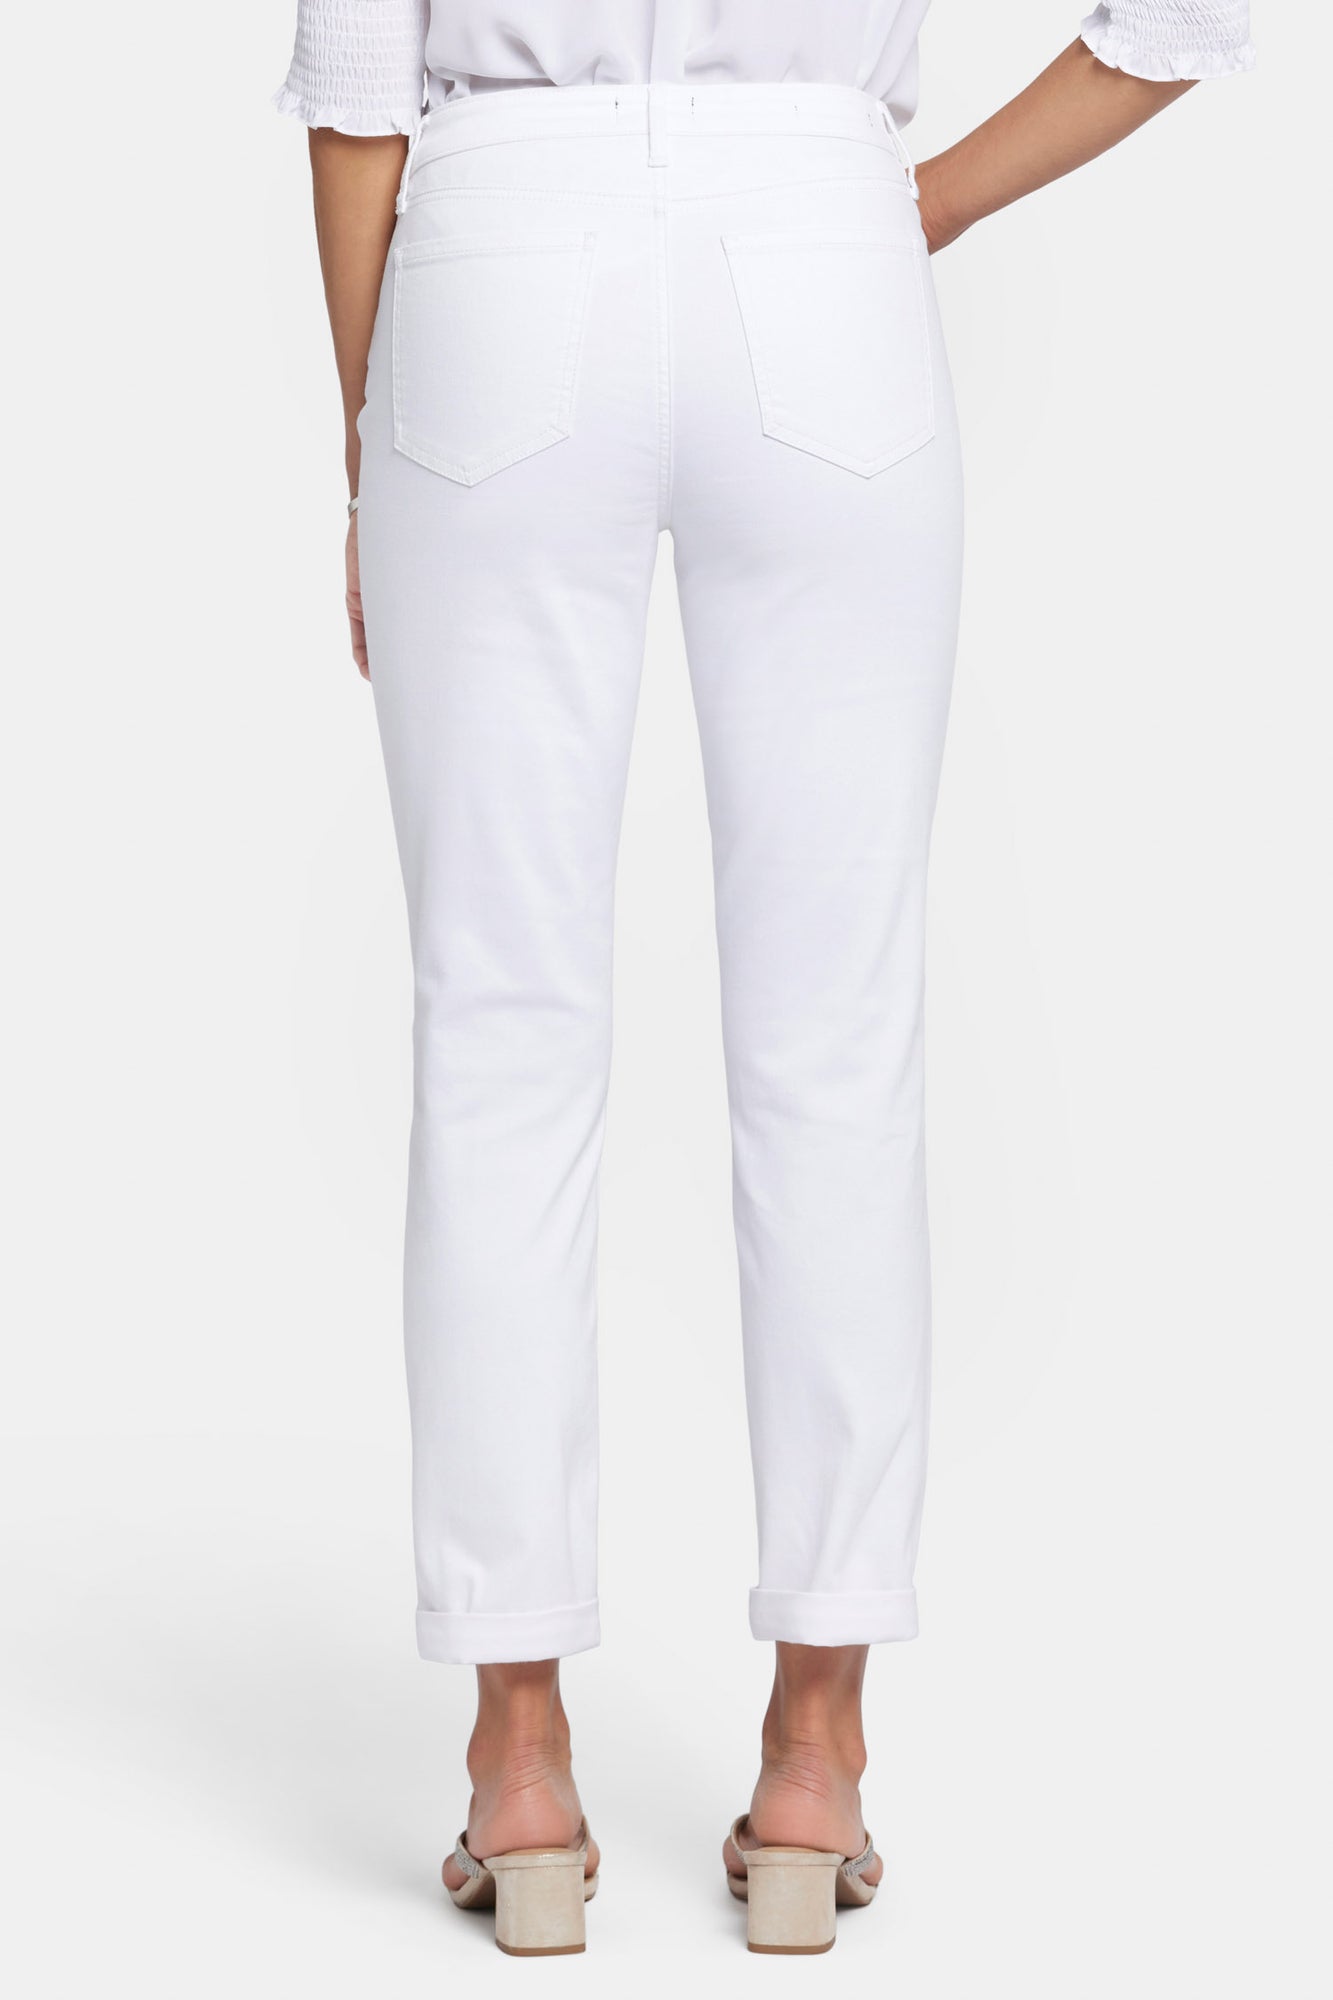 NYDJ Margot Girlfriend Jeans In Petite With Roll Cuffs - Optic White